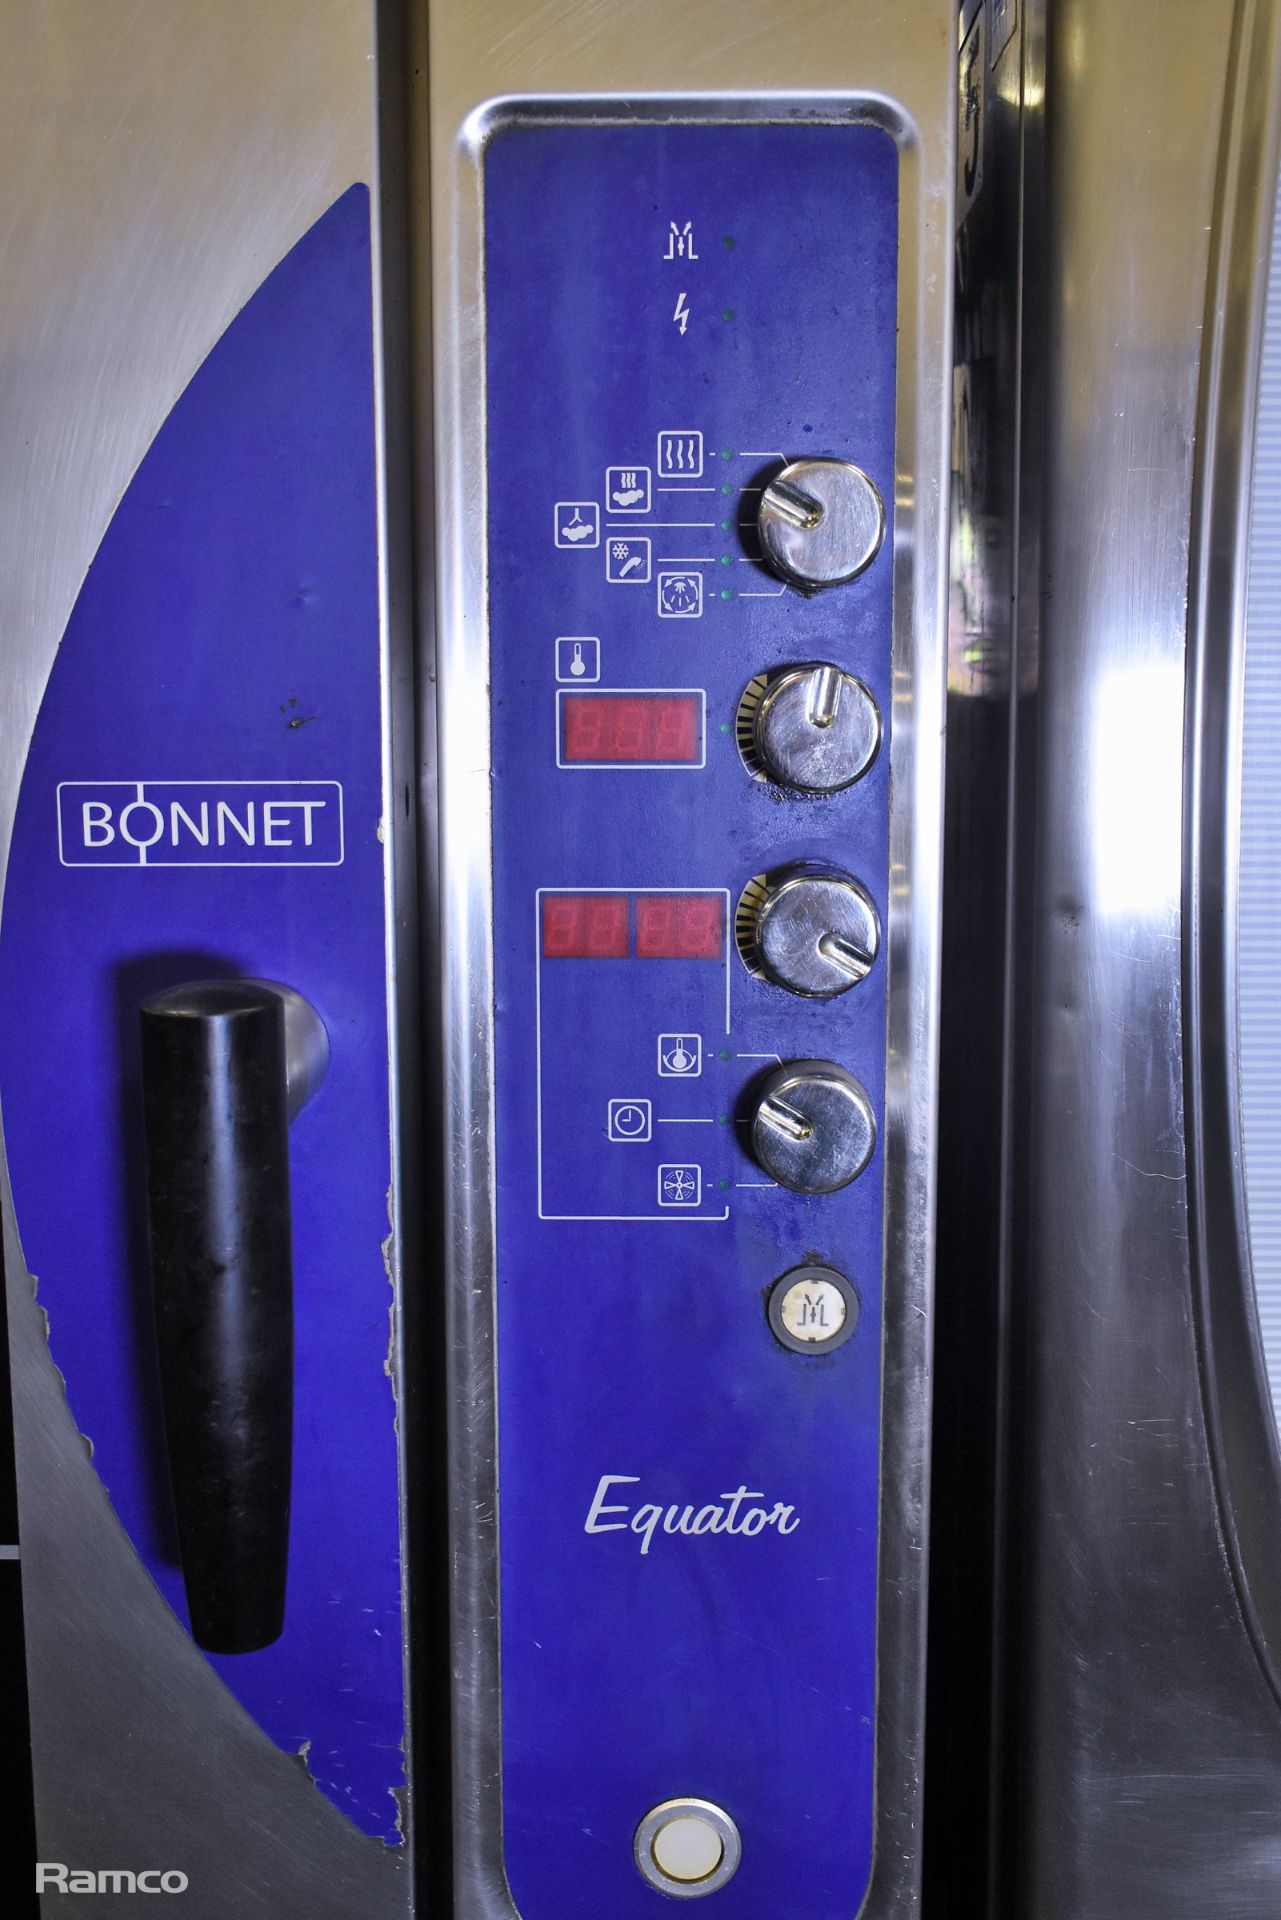 Bonnet Equator combi oven with stand - W 930 x D 900 x H 1850mm - Image 6 of 7